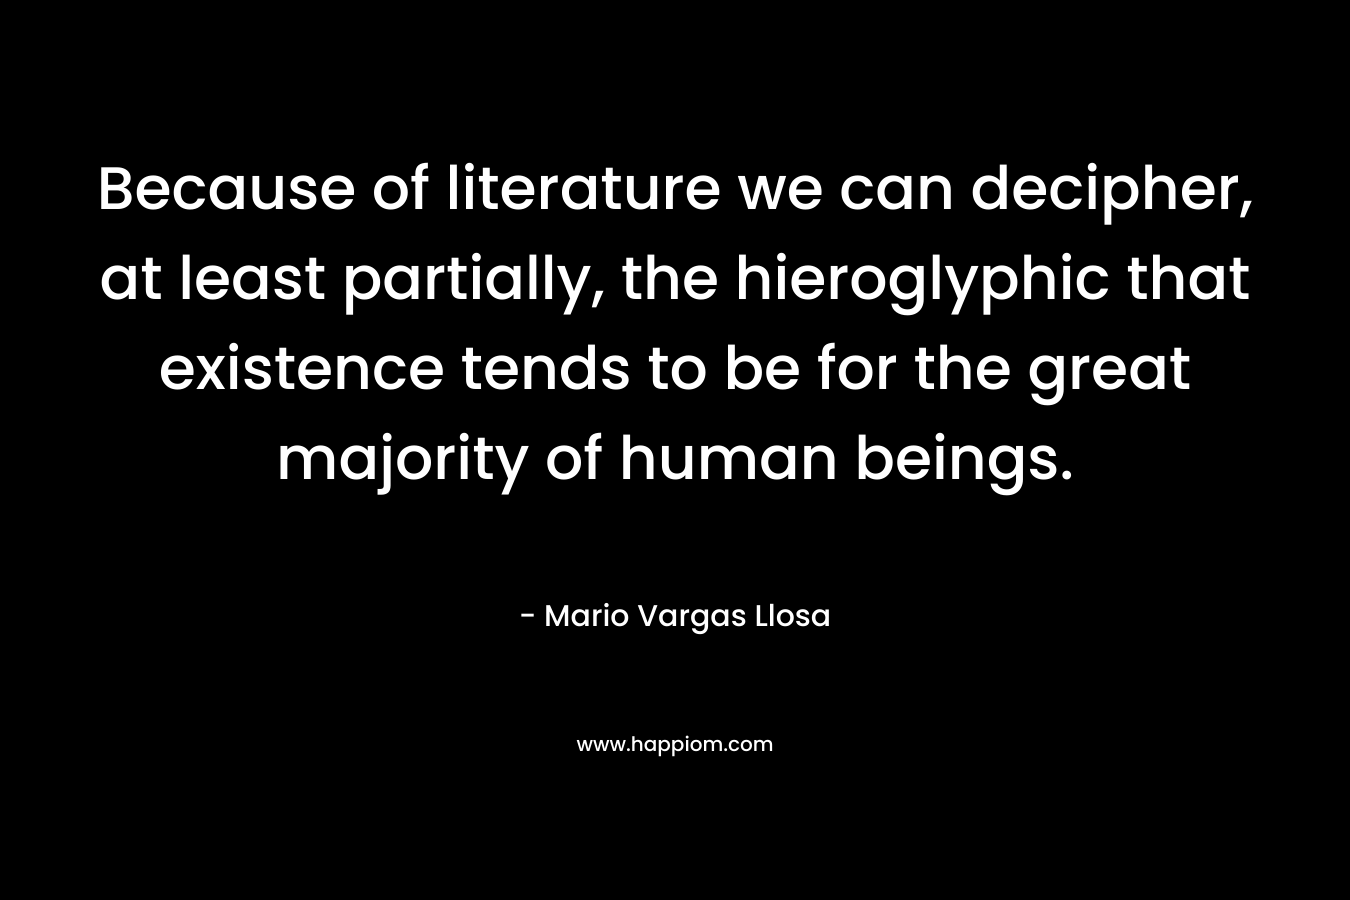 Because of literature we can decipher, at least partially, the hieroglyphic that existence tends to be for the great majority of human beings.